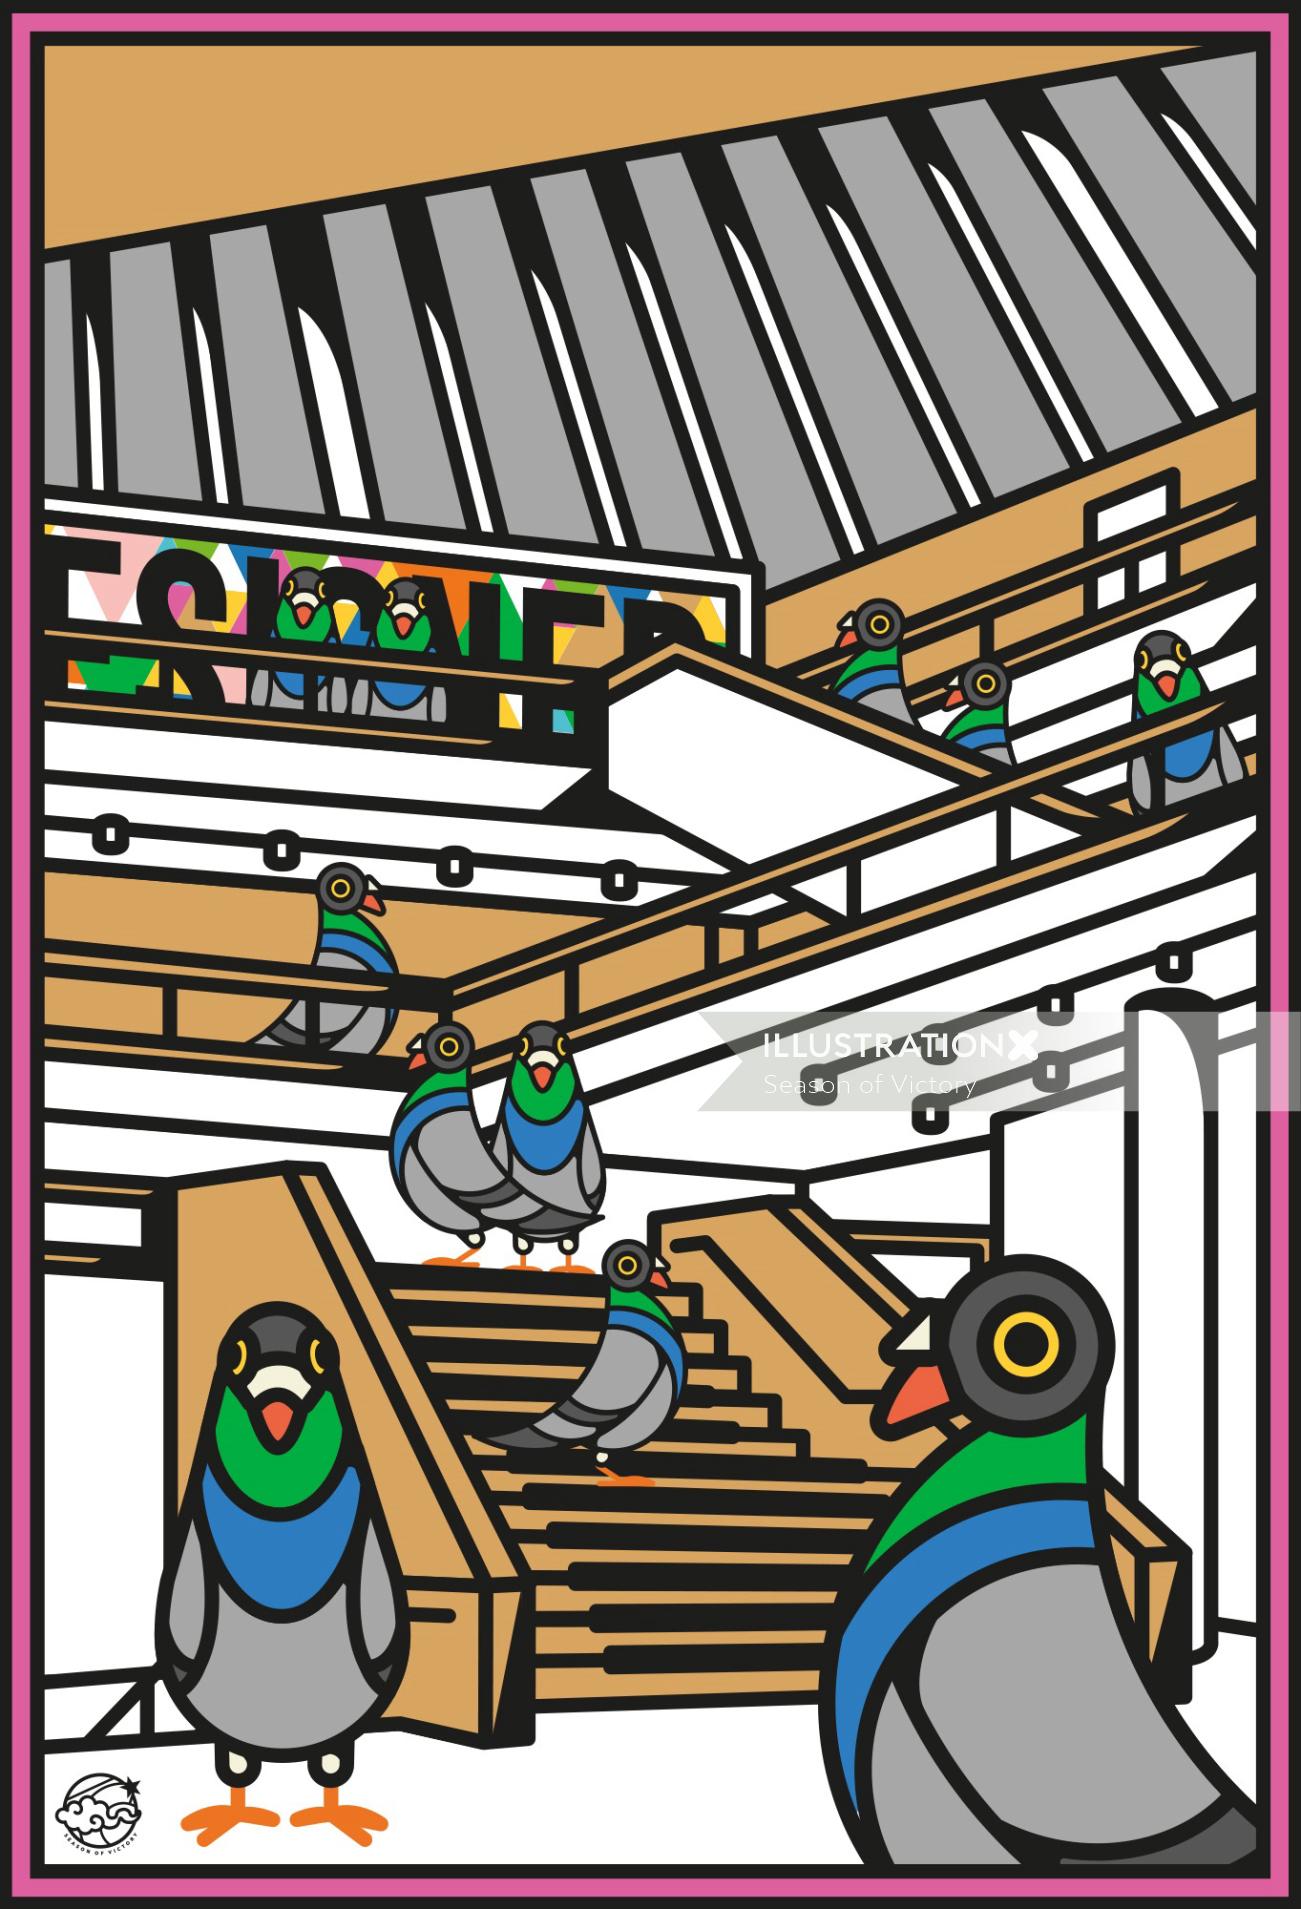 This picture shows pigeons from London taking over the Design Museum